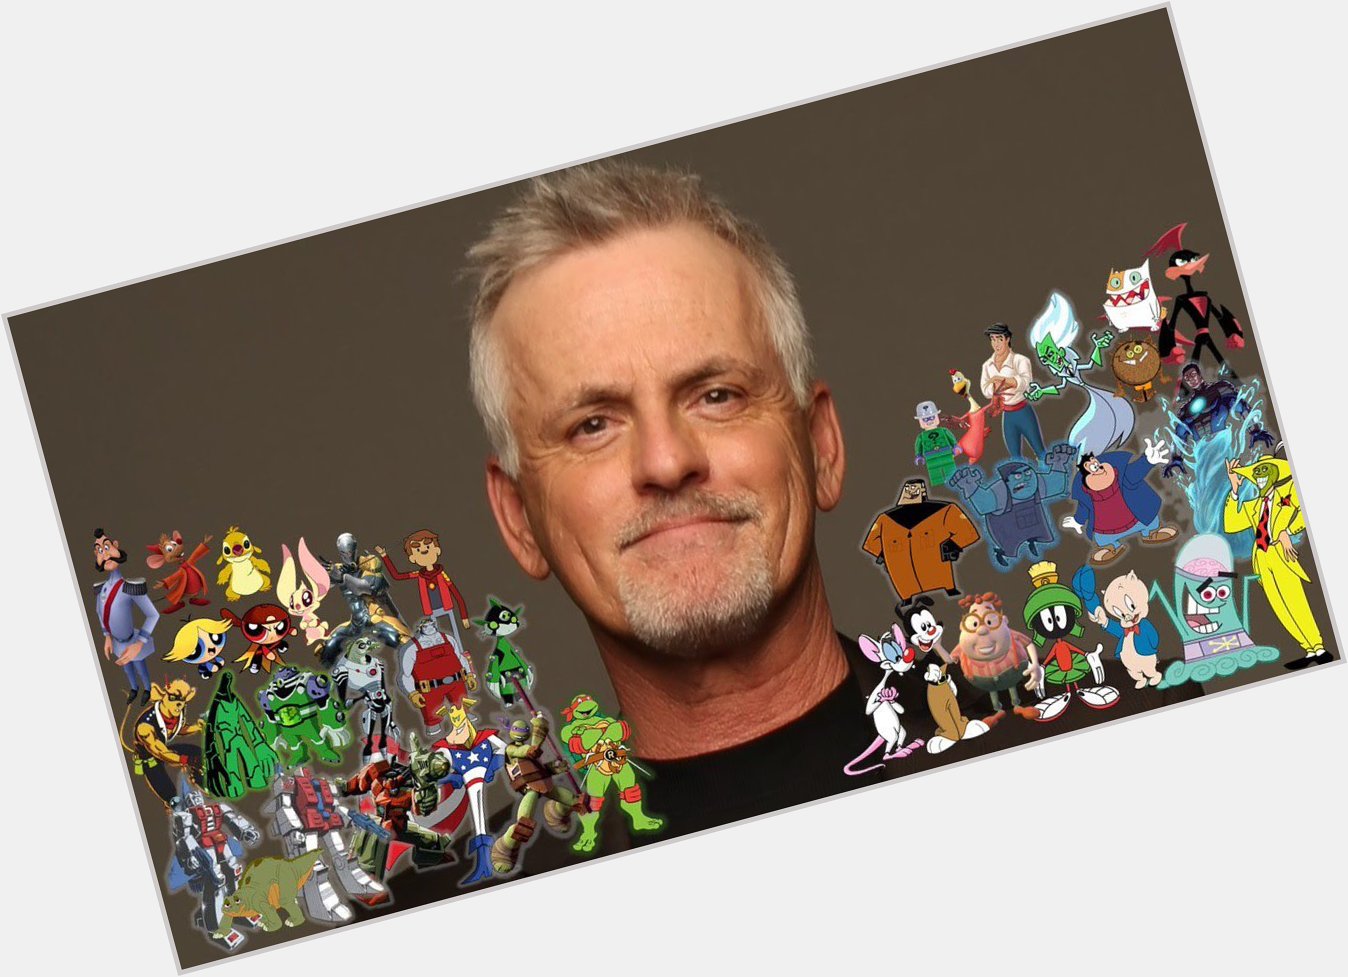 I know I m five days late but Happy Late Birthday Rob Paulsen. He turned 62 